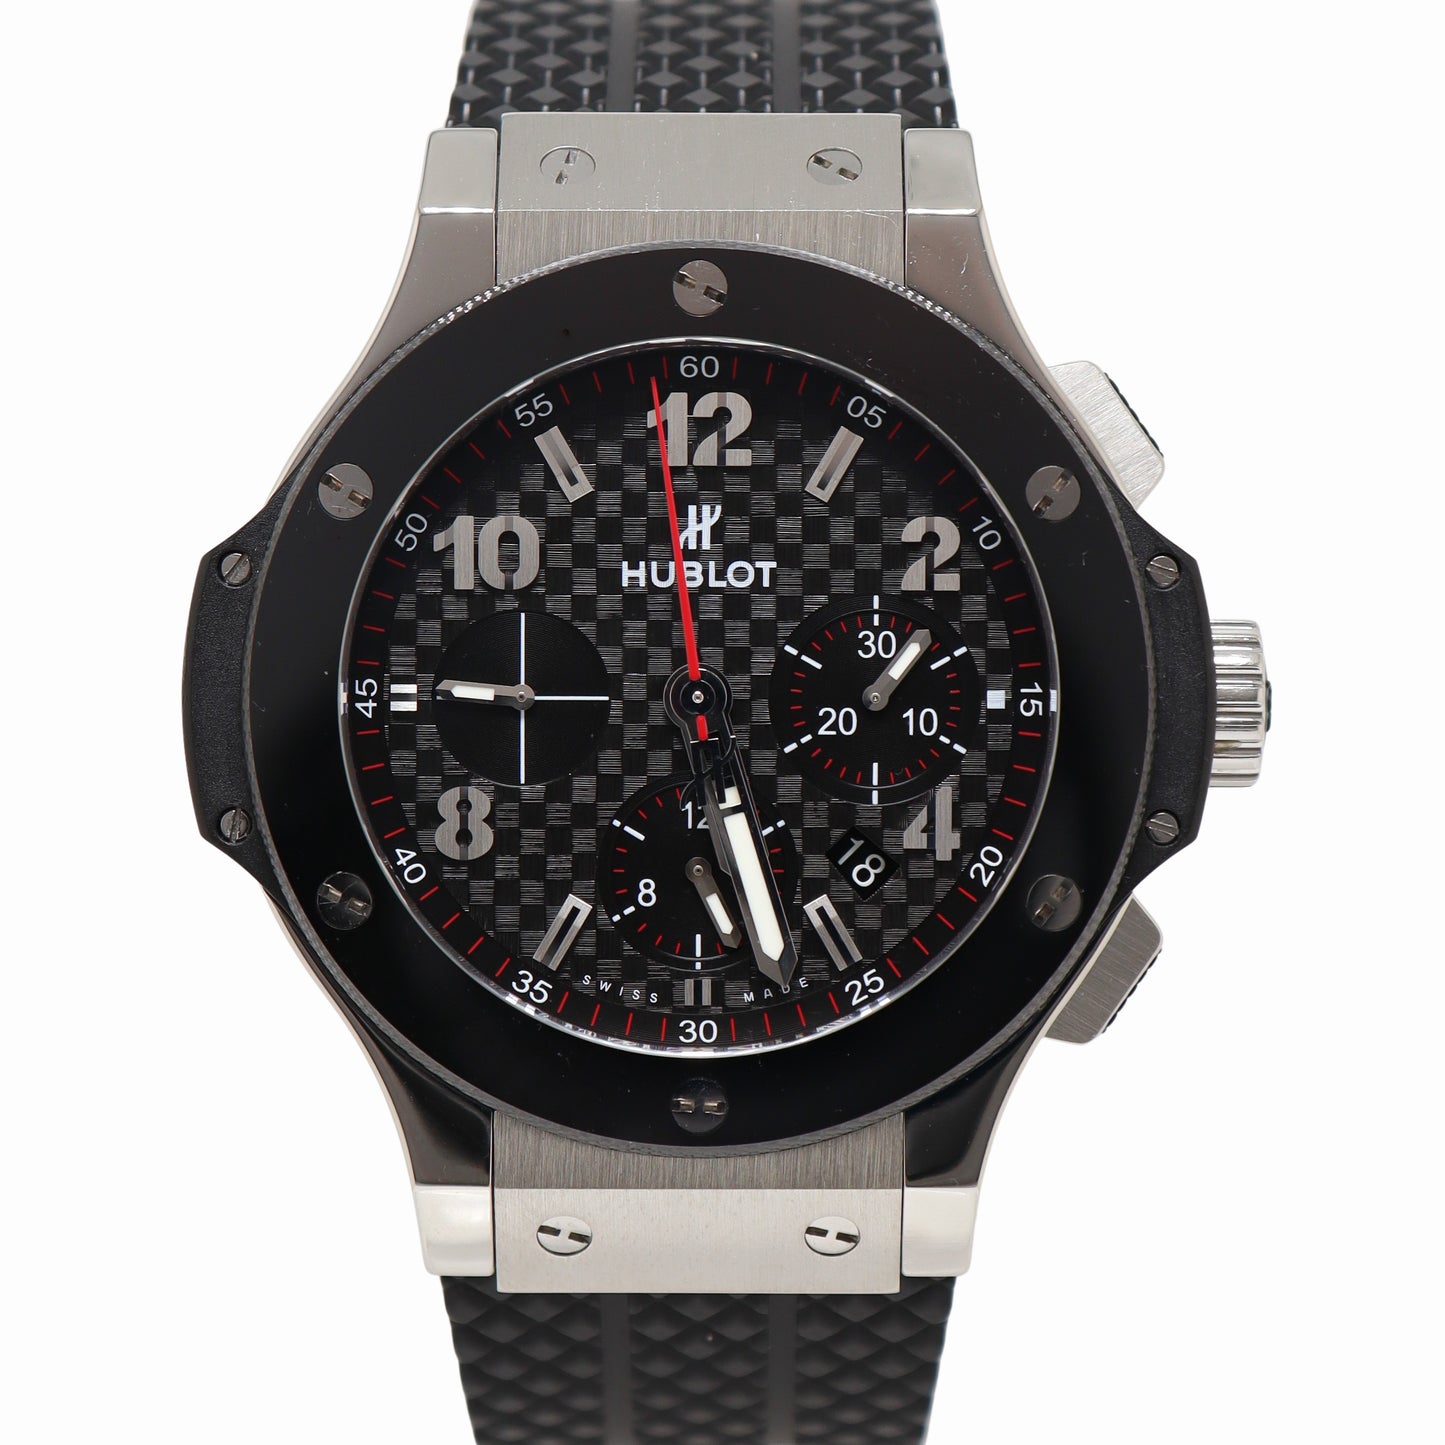 Hublot Mens Big Bang Stainless Steel Black Carbon Fiber Chronograph Dial Watch Reference# 301.SB.131.RX - Happy Jewelers Fine Jewelry Lifetime Warranty